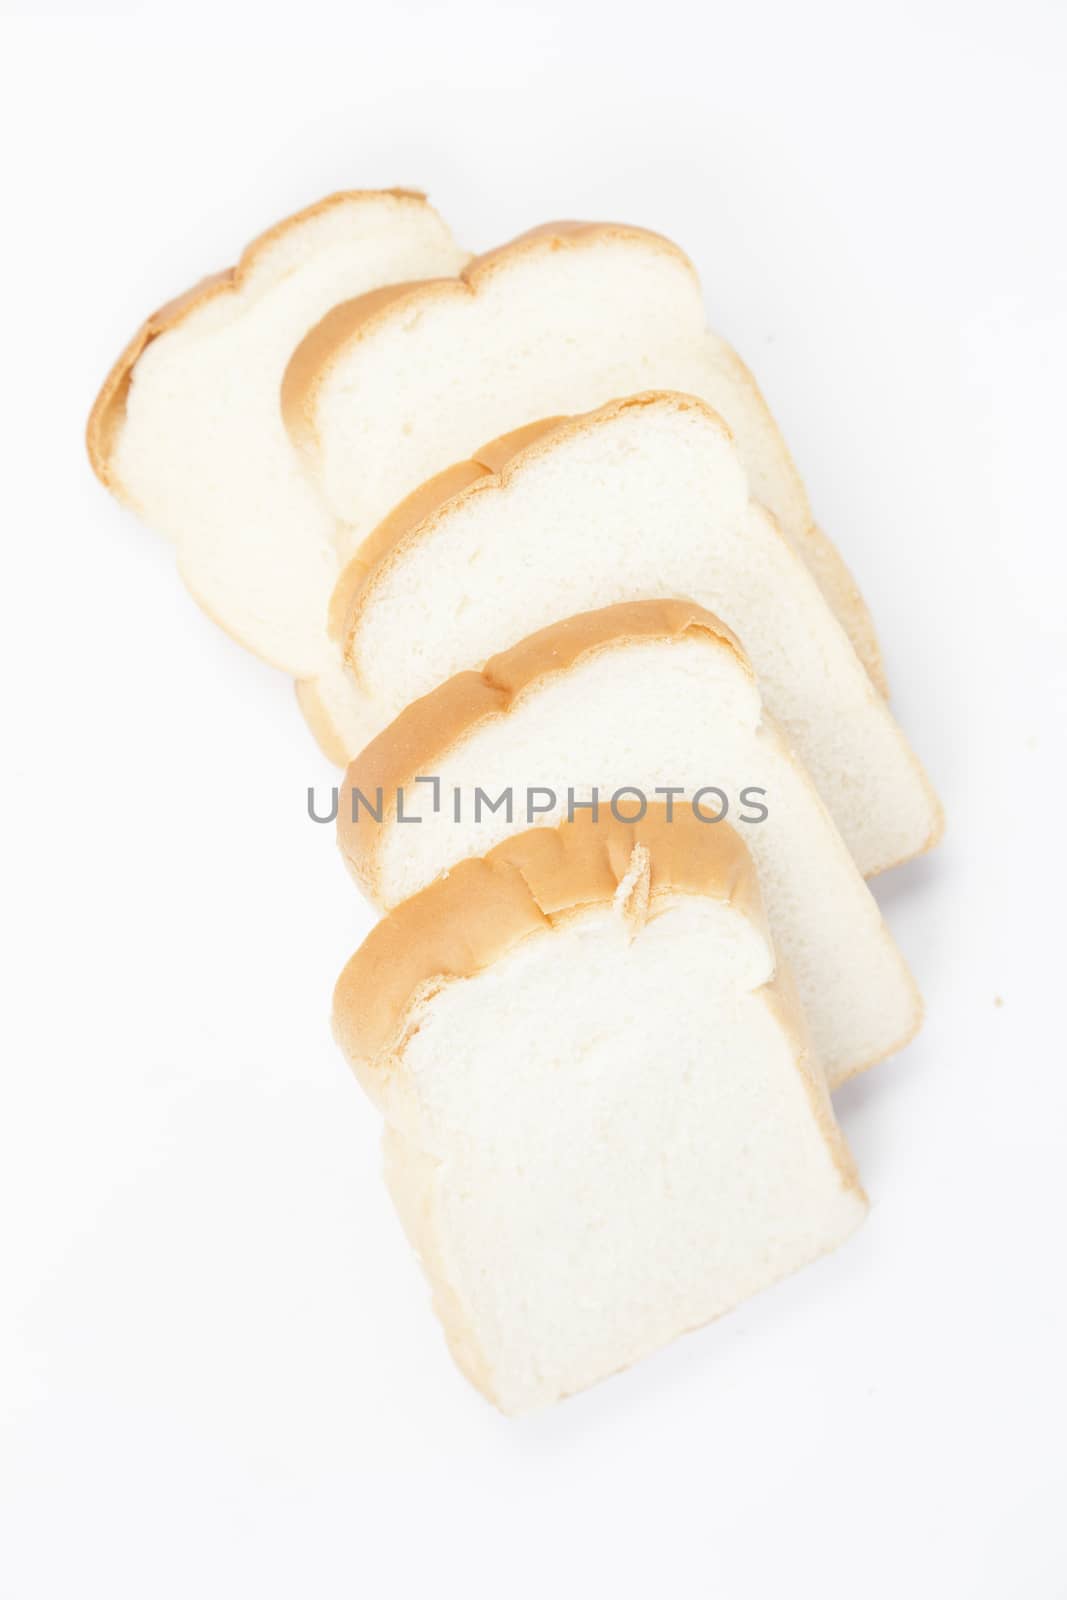 Sliced ������bread on a white background. Bread stacked in rows.